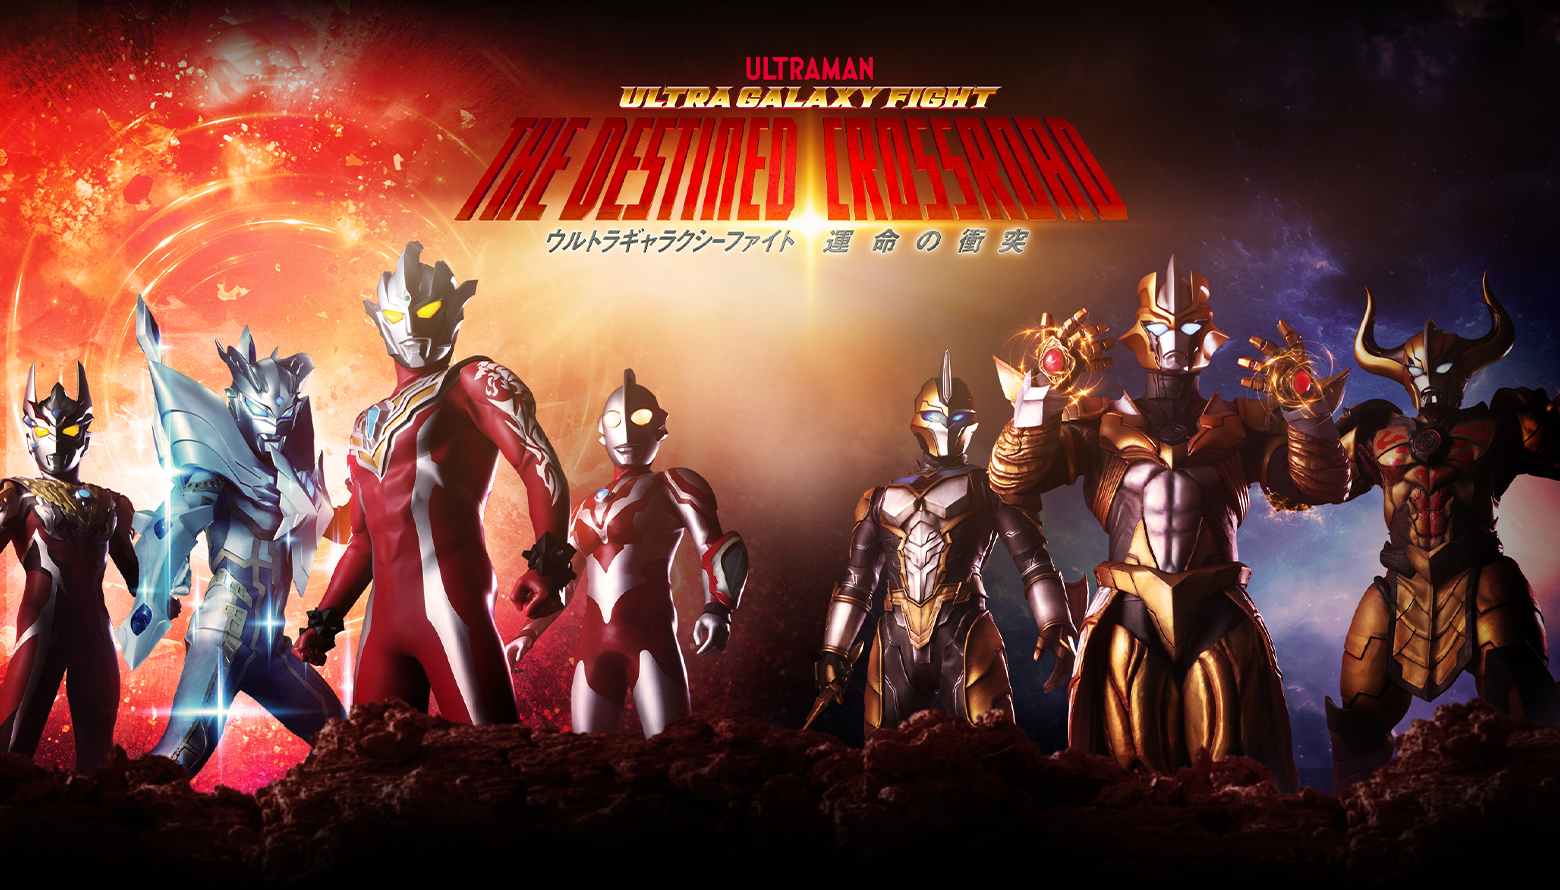 ULTRA GALAXY FIGHT: THE DESTINED CROSSROAD TO PREMIERE ON ULTRAMAN CONNECTION